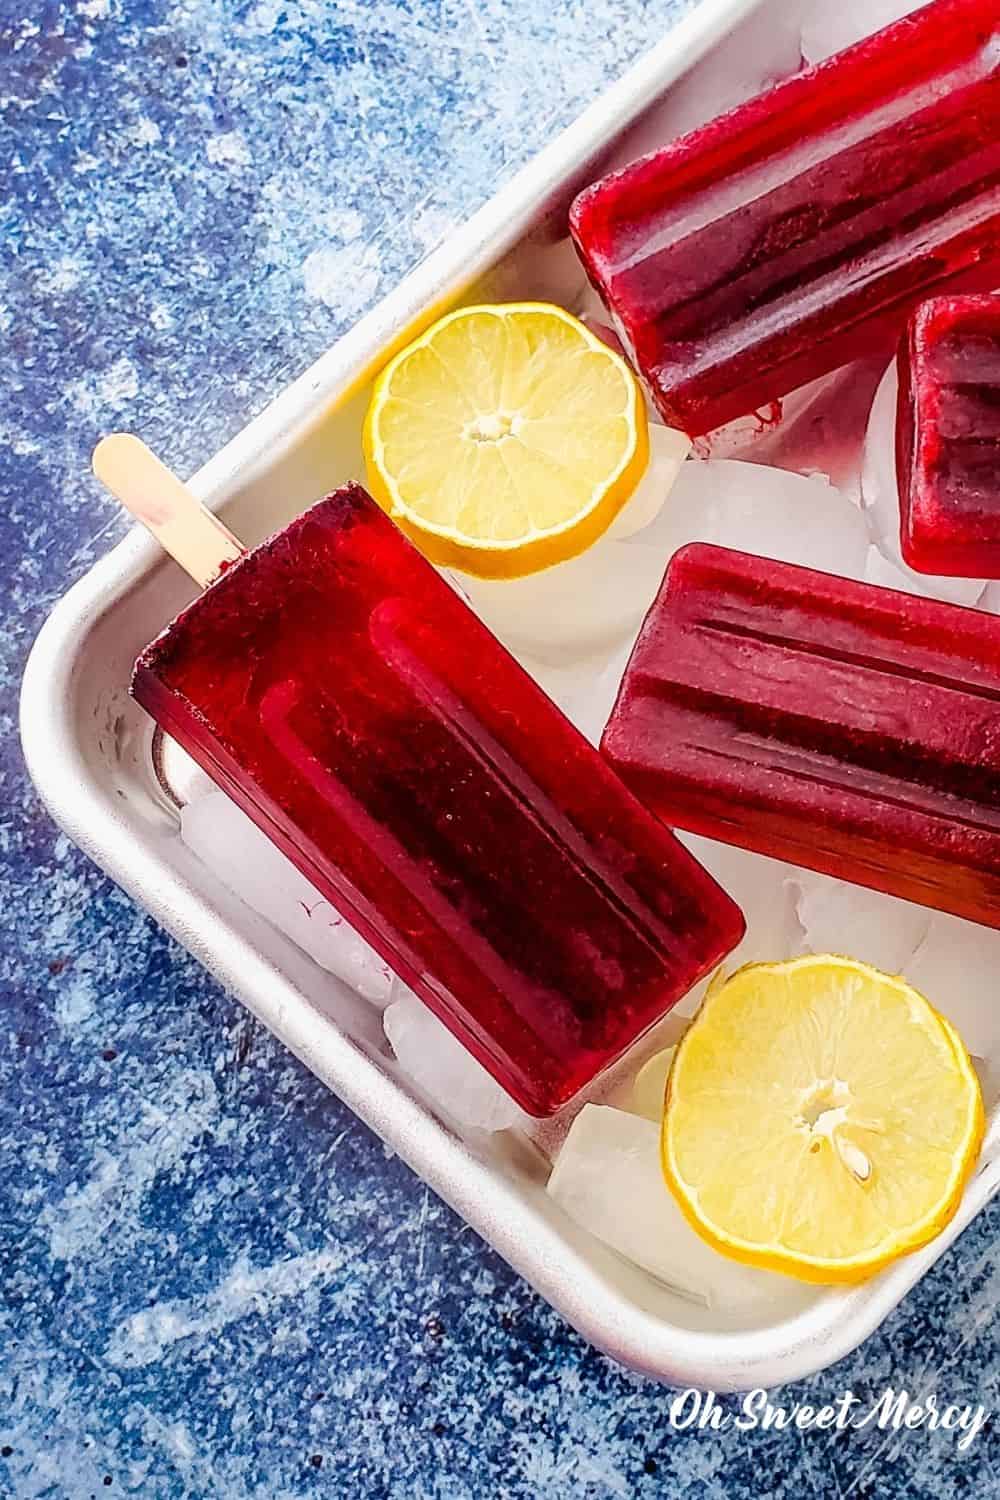 Refreshing, healthy, and gorgeously red (without artificial dyes) these simple Lemon Hibiscus Popsicles are sugar free and a fantastic THM FP treat. With zero fuel, enjoy these any time, with any THM fuel style. #sugarfree #hibiscus #popsicles #thm #fuelpull @ohsweetmercy